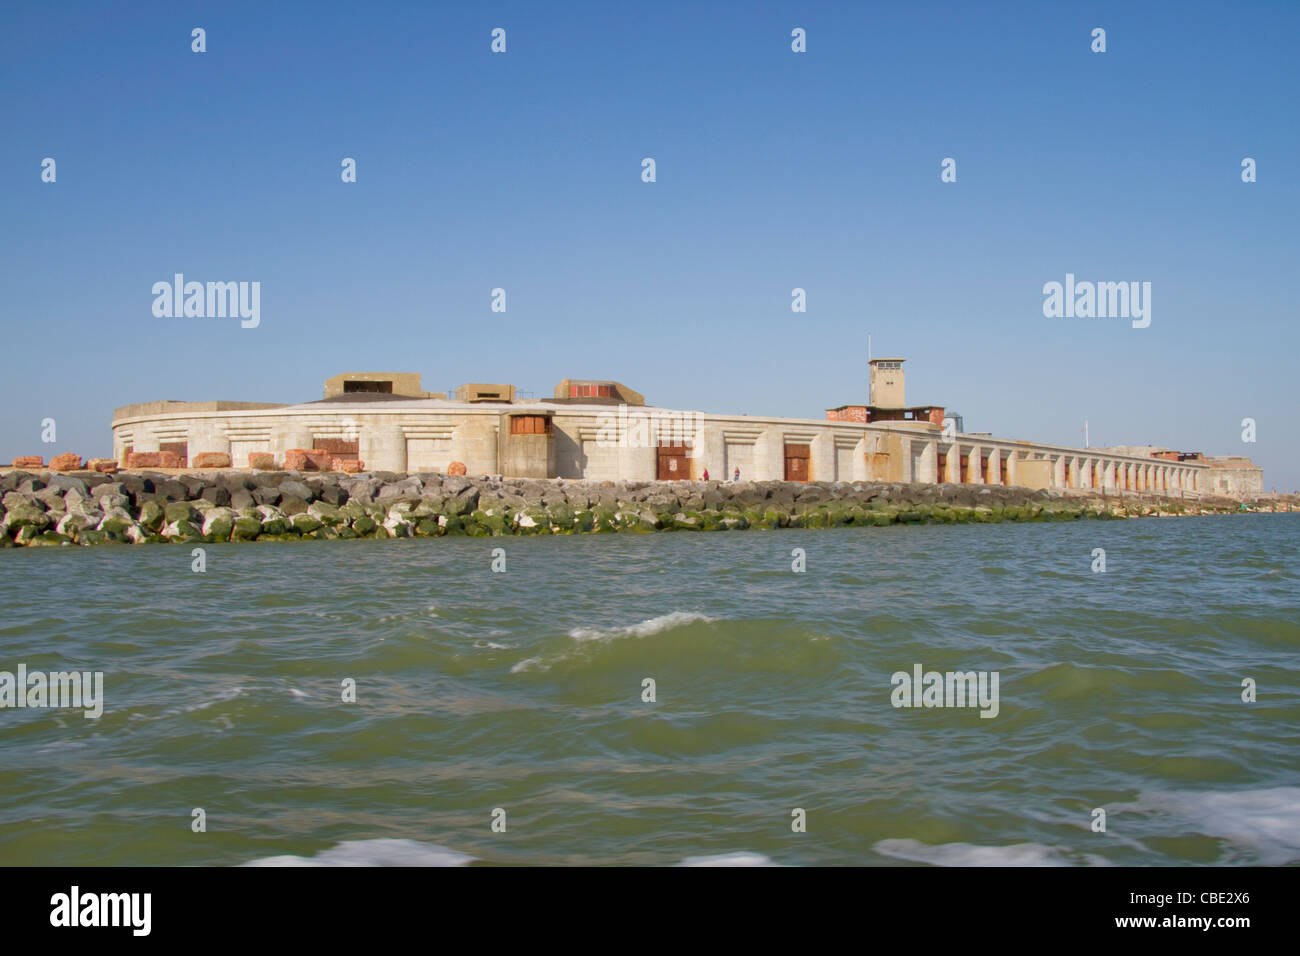 Hurst Castle, Hurst Point on the Hampshire coast, viewed from the sea Stock Photo